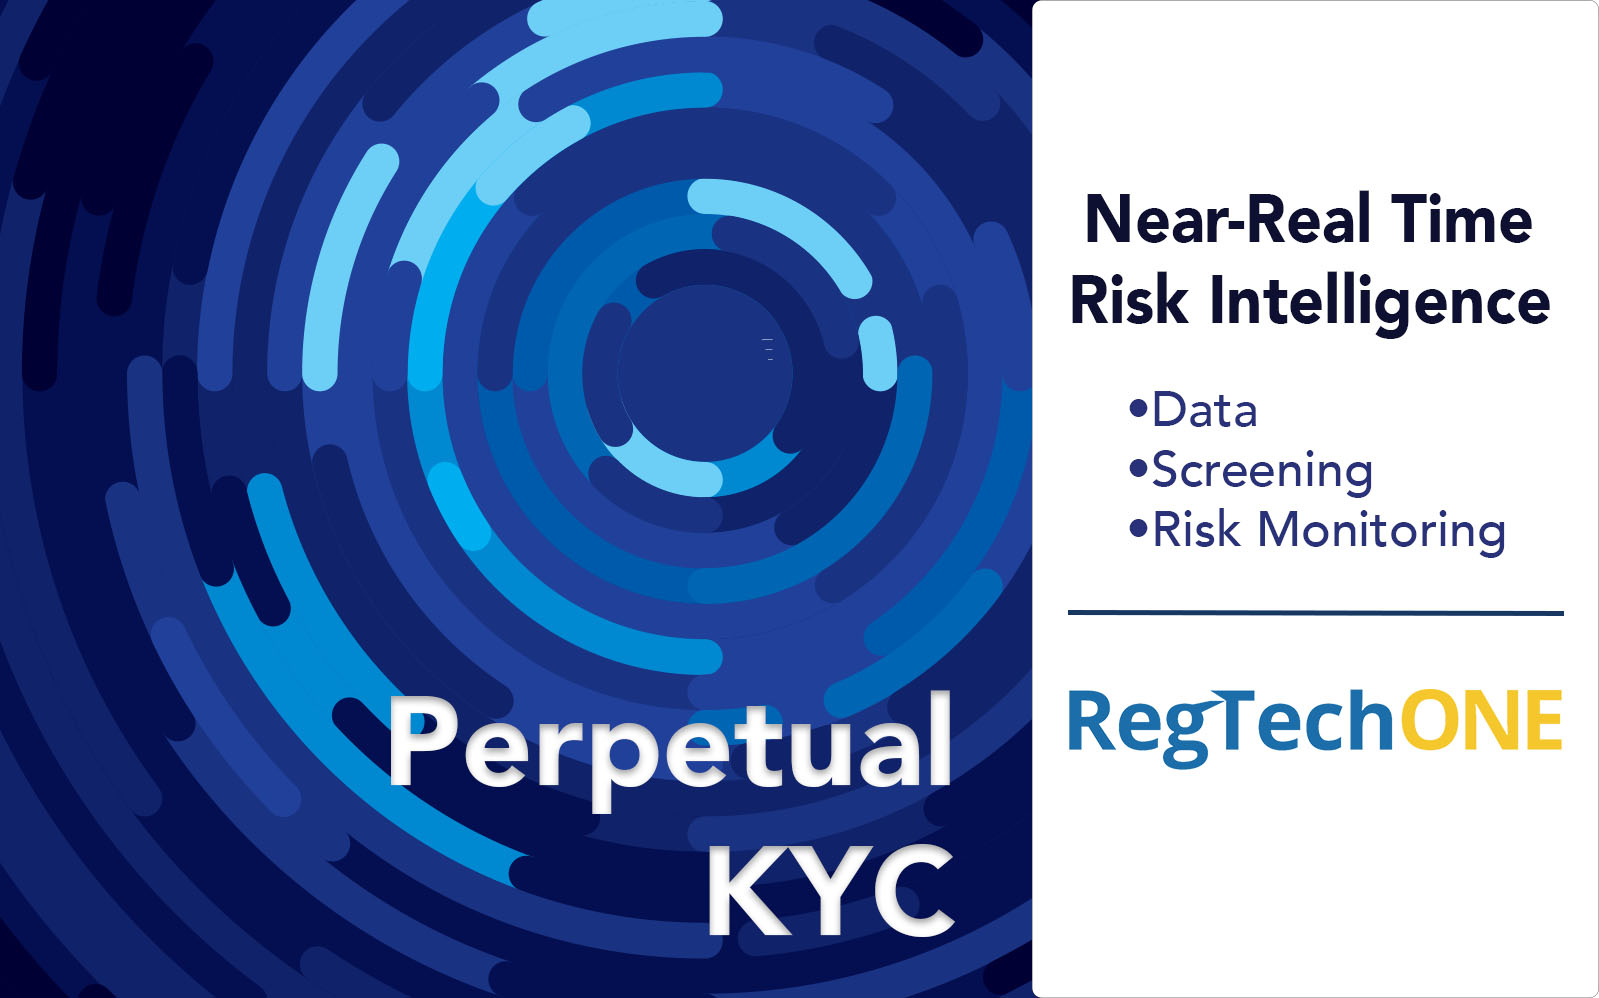 Art illustration promoting Perpetual KYC for near-real time Risk Intelligence on the RegTechONE platform for AML Compliance and GRC